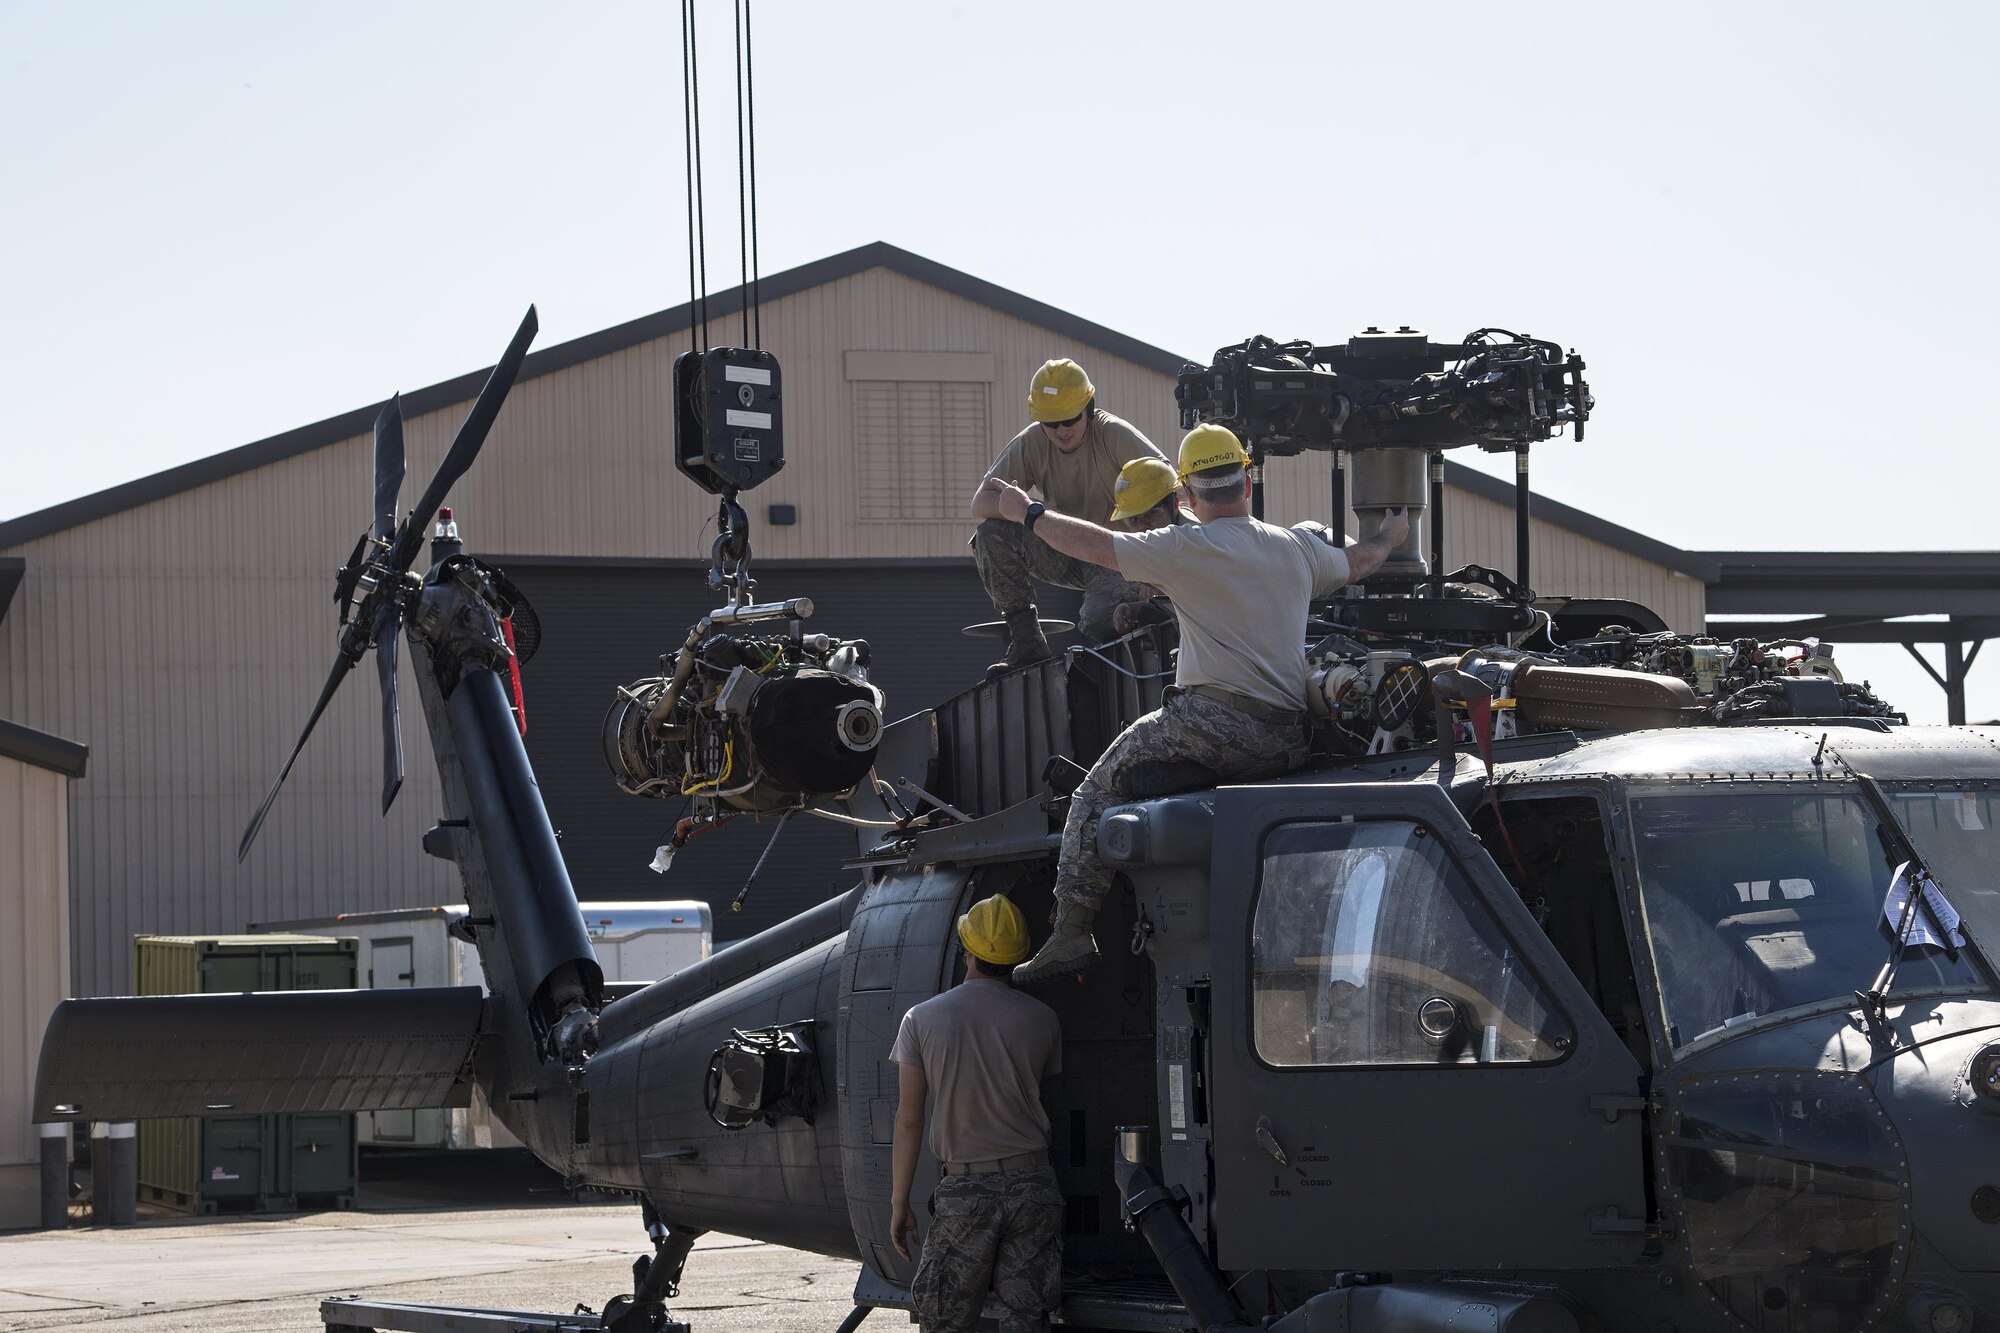 Airmen from the 41st Helicopter Maintenance Unit install an engine onto a HH-60G Pave Hawk, March 22, 2017, at Moody Air Force Base, Ga. The 41st HMU is responsible for Moody’s Pave Hawk fleet. Through innovation and preventative maintenance, they ensure each of their 13 Pave Hawks receive the upkeep needed to accomplish the mission. (U.S. Air Force photo by Airman 1st Class Janiqua P. Robinson)